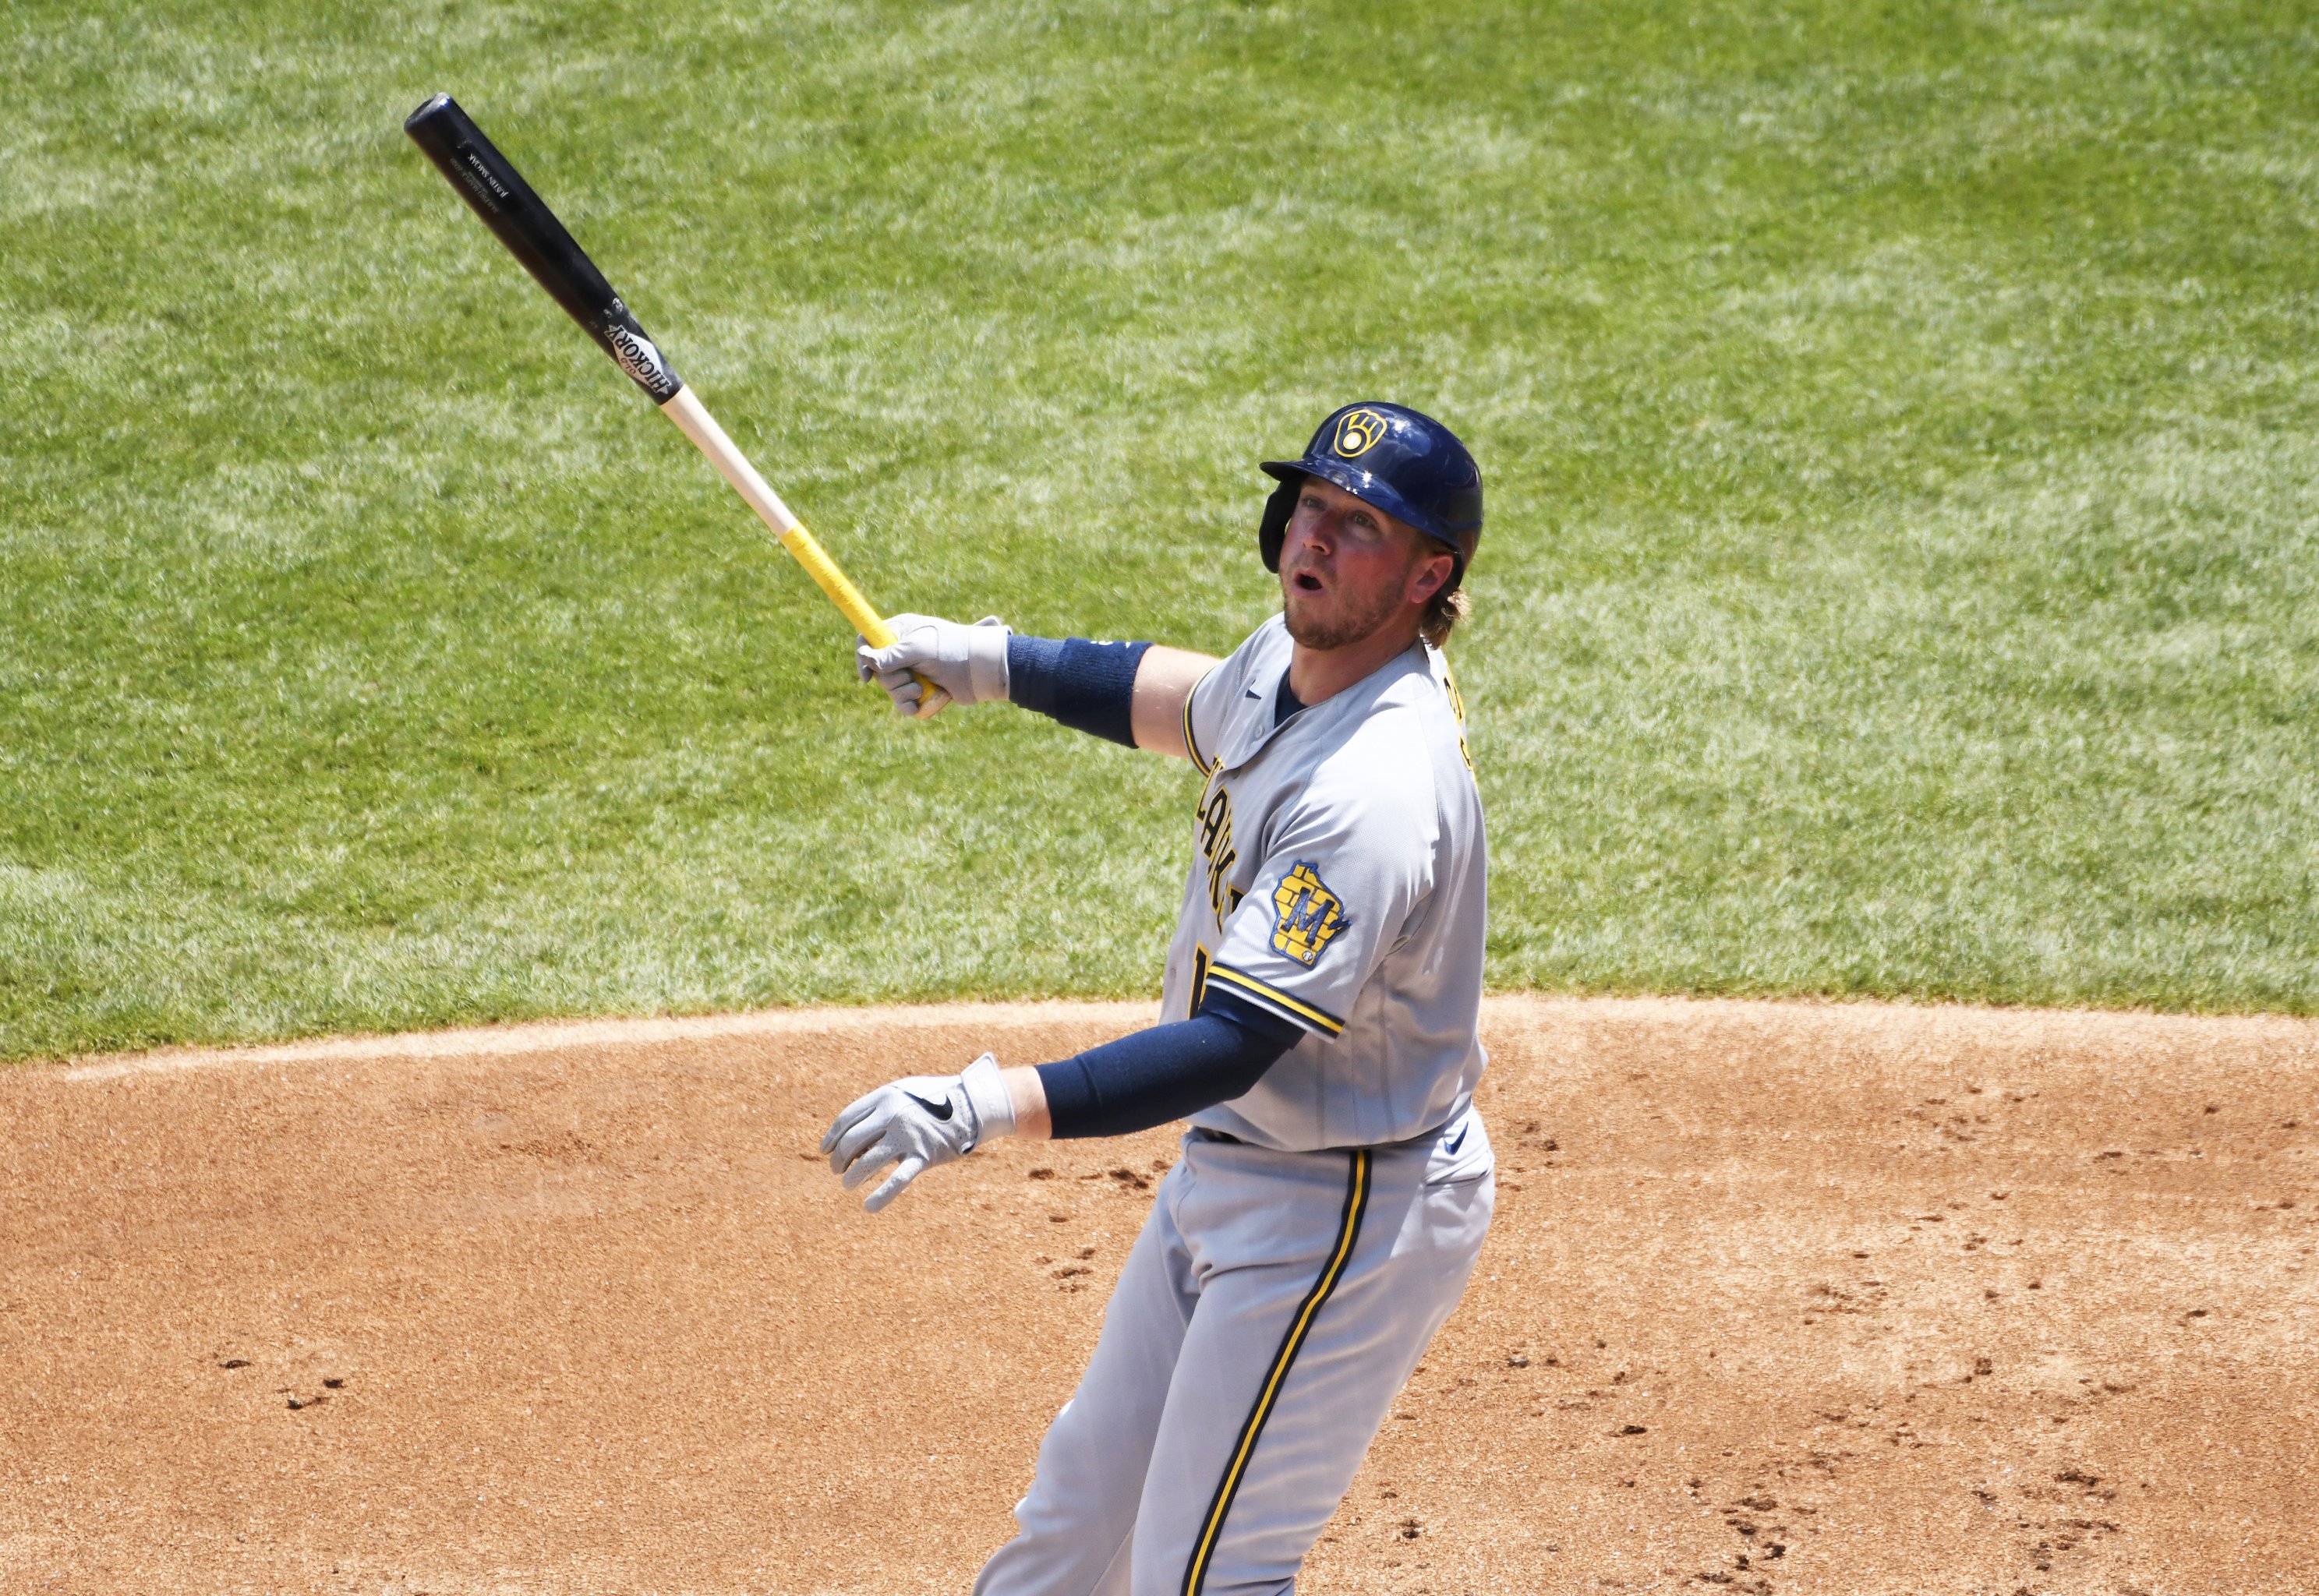 Report: Brewers to sign free agent 1B Justin Smoak - Brew Crew Ball